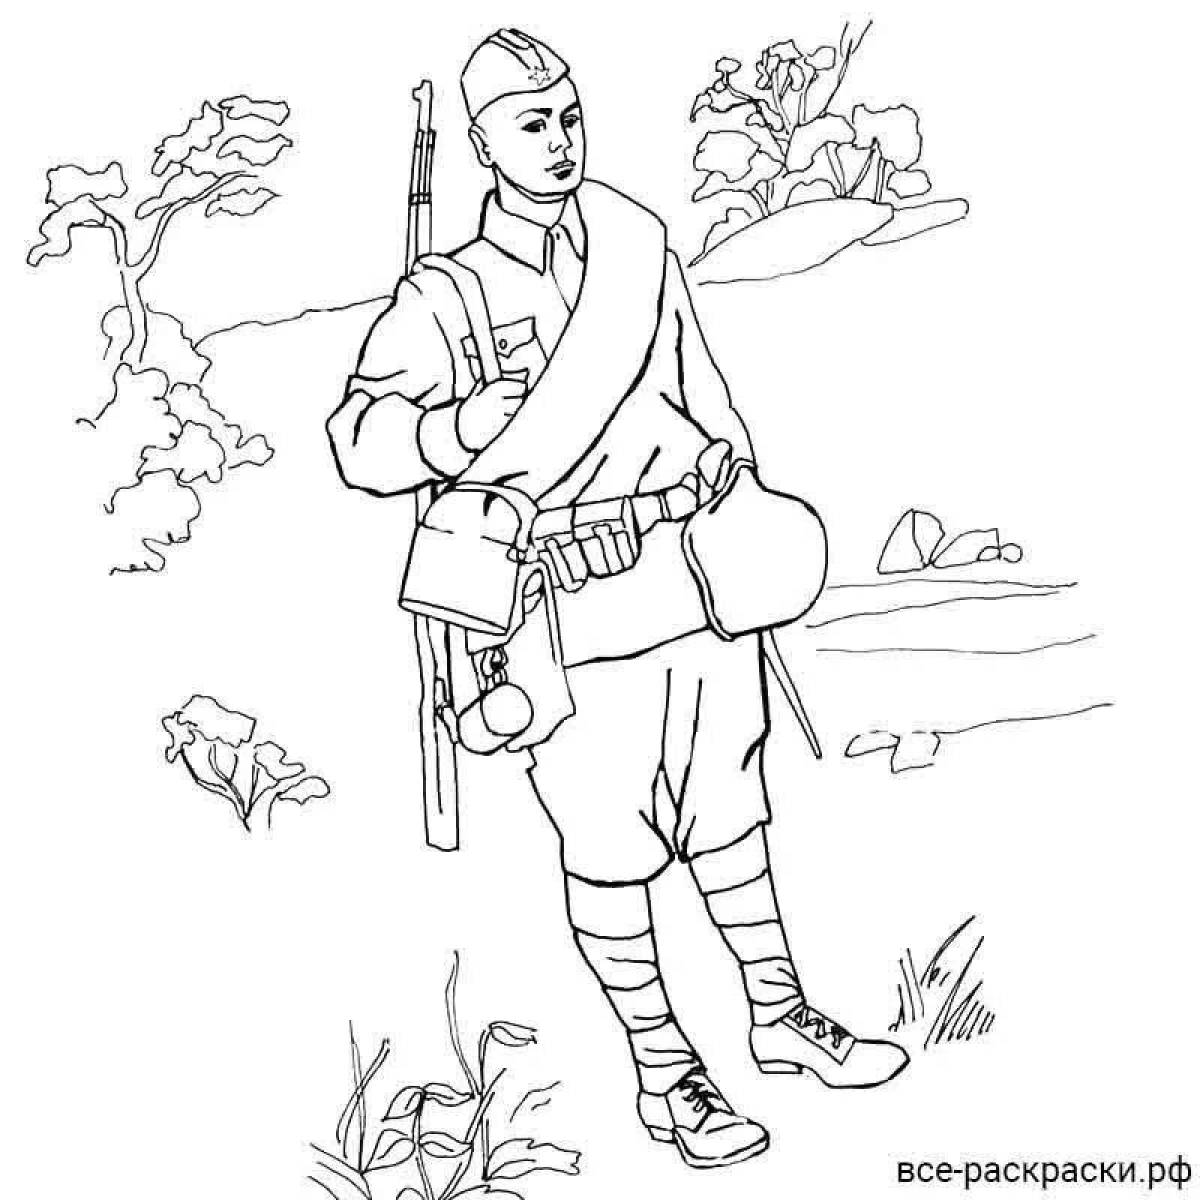 Inspiring soldier coloring book for kids